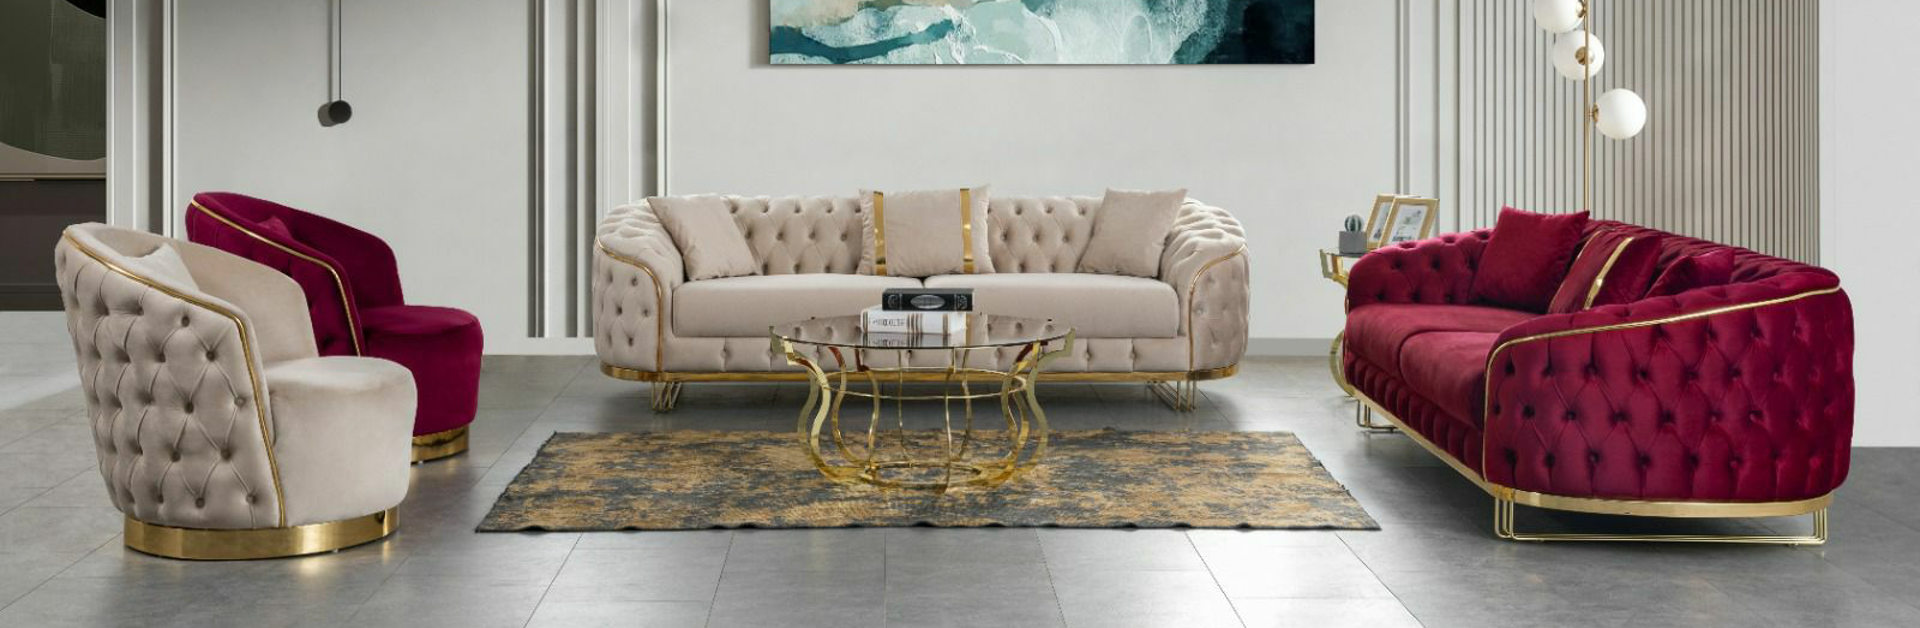 Our mission is to import selective products to sell the best furniture possible for our customers with great lasting quality and affordable prices. We believe that delivering unique products for our customers is our key selling point. 